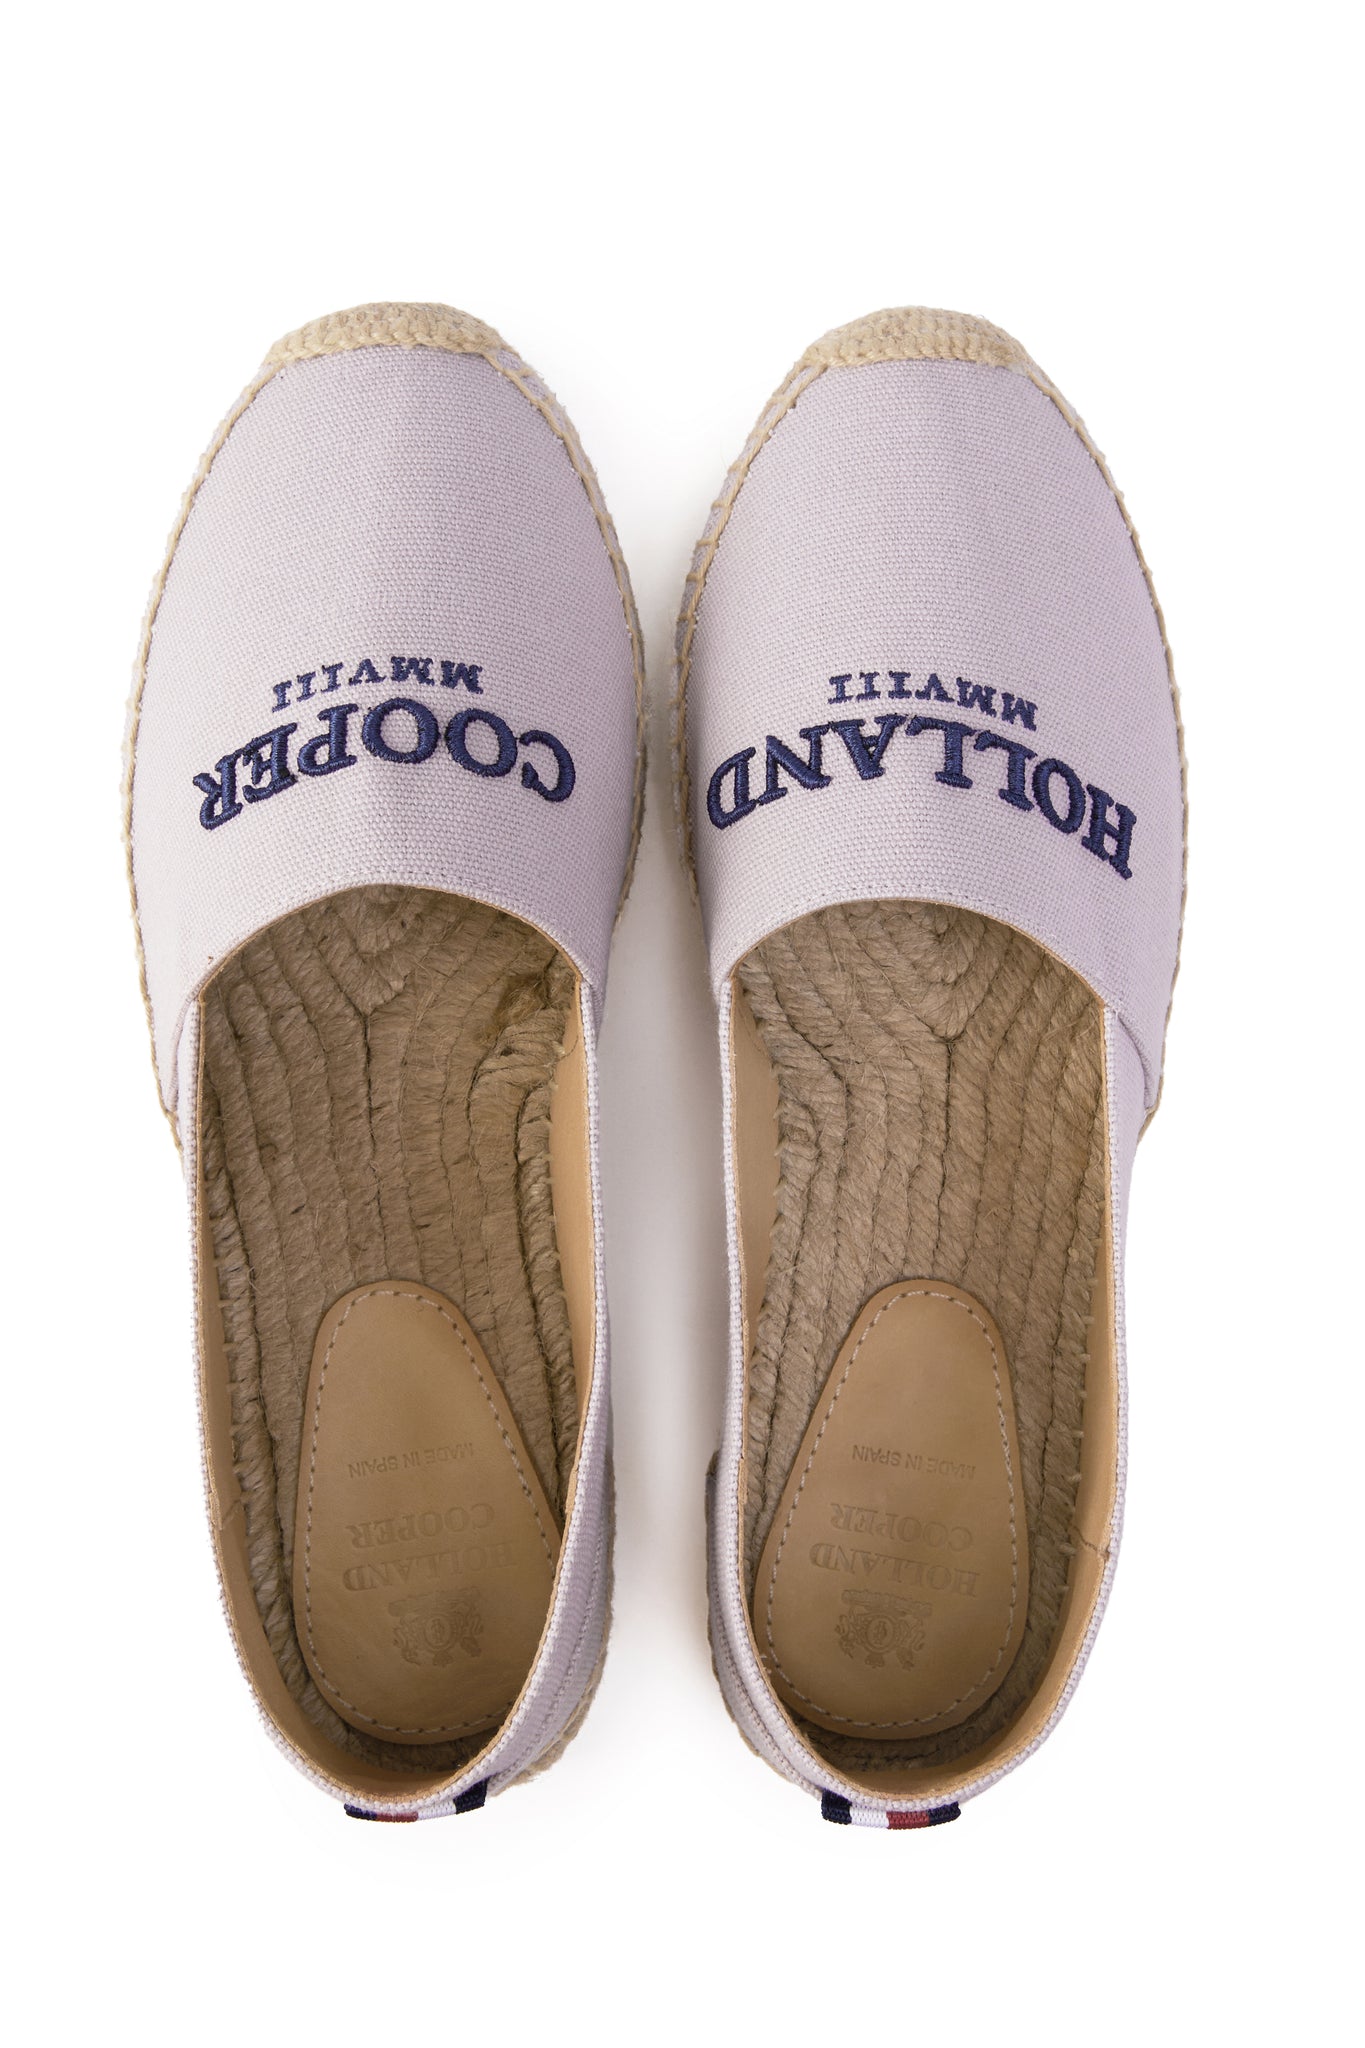 classic style light pink canvas espadrille with plaited jute sole and jute toe cap with navy embroidered branding on top and red, white and blue tag to heel